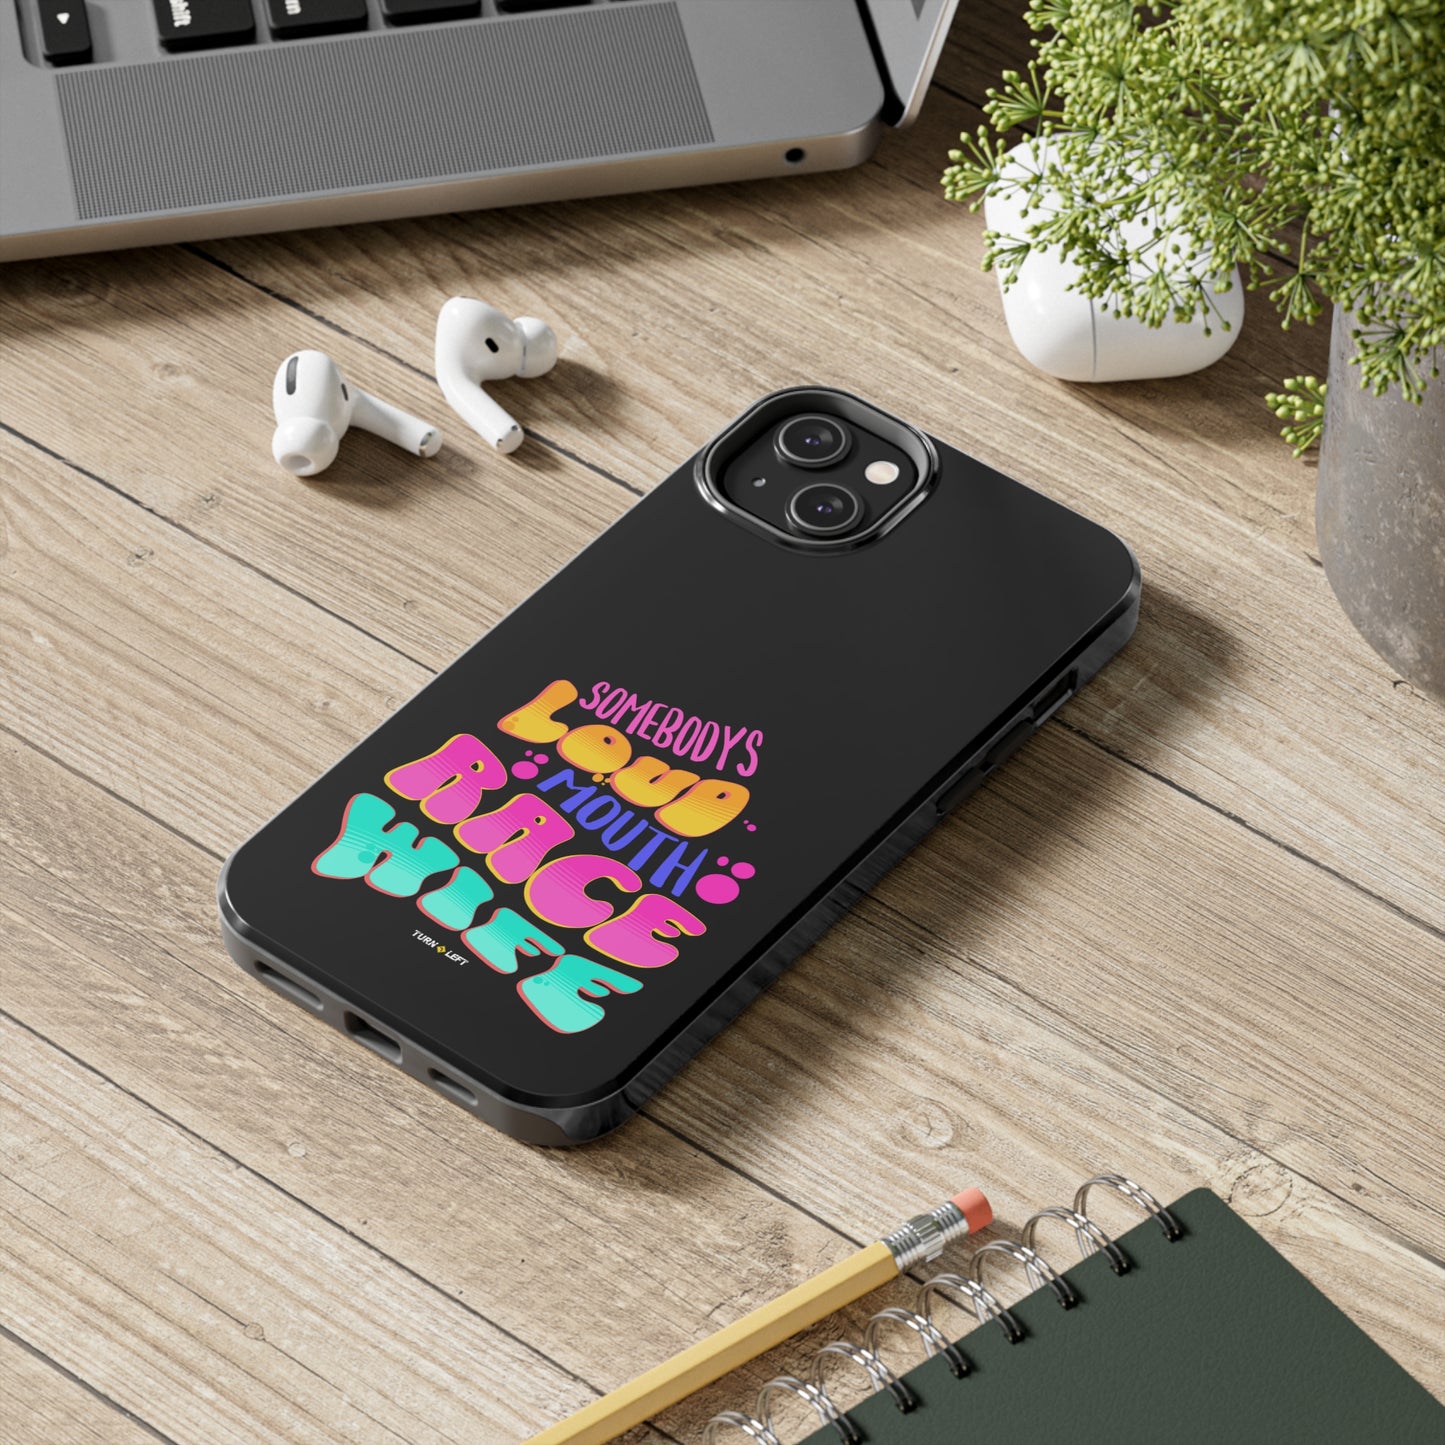 Retro Somebody's Loud Mouth Race Wife Tough Phone Cases